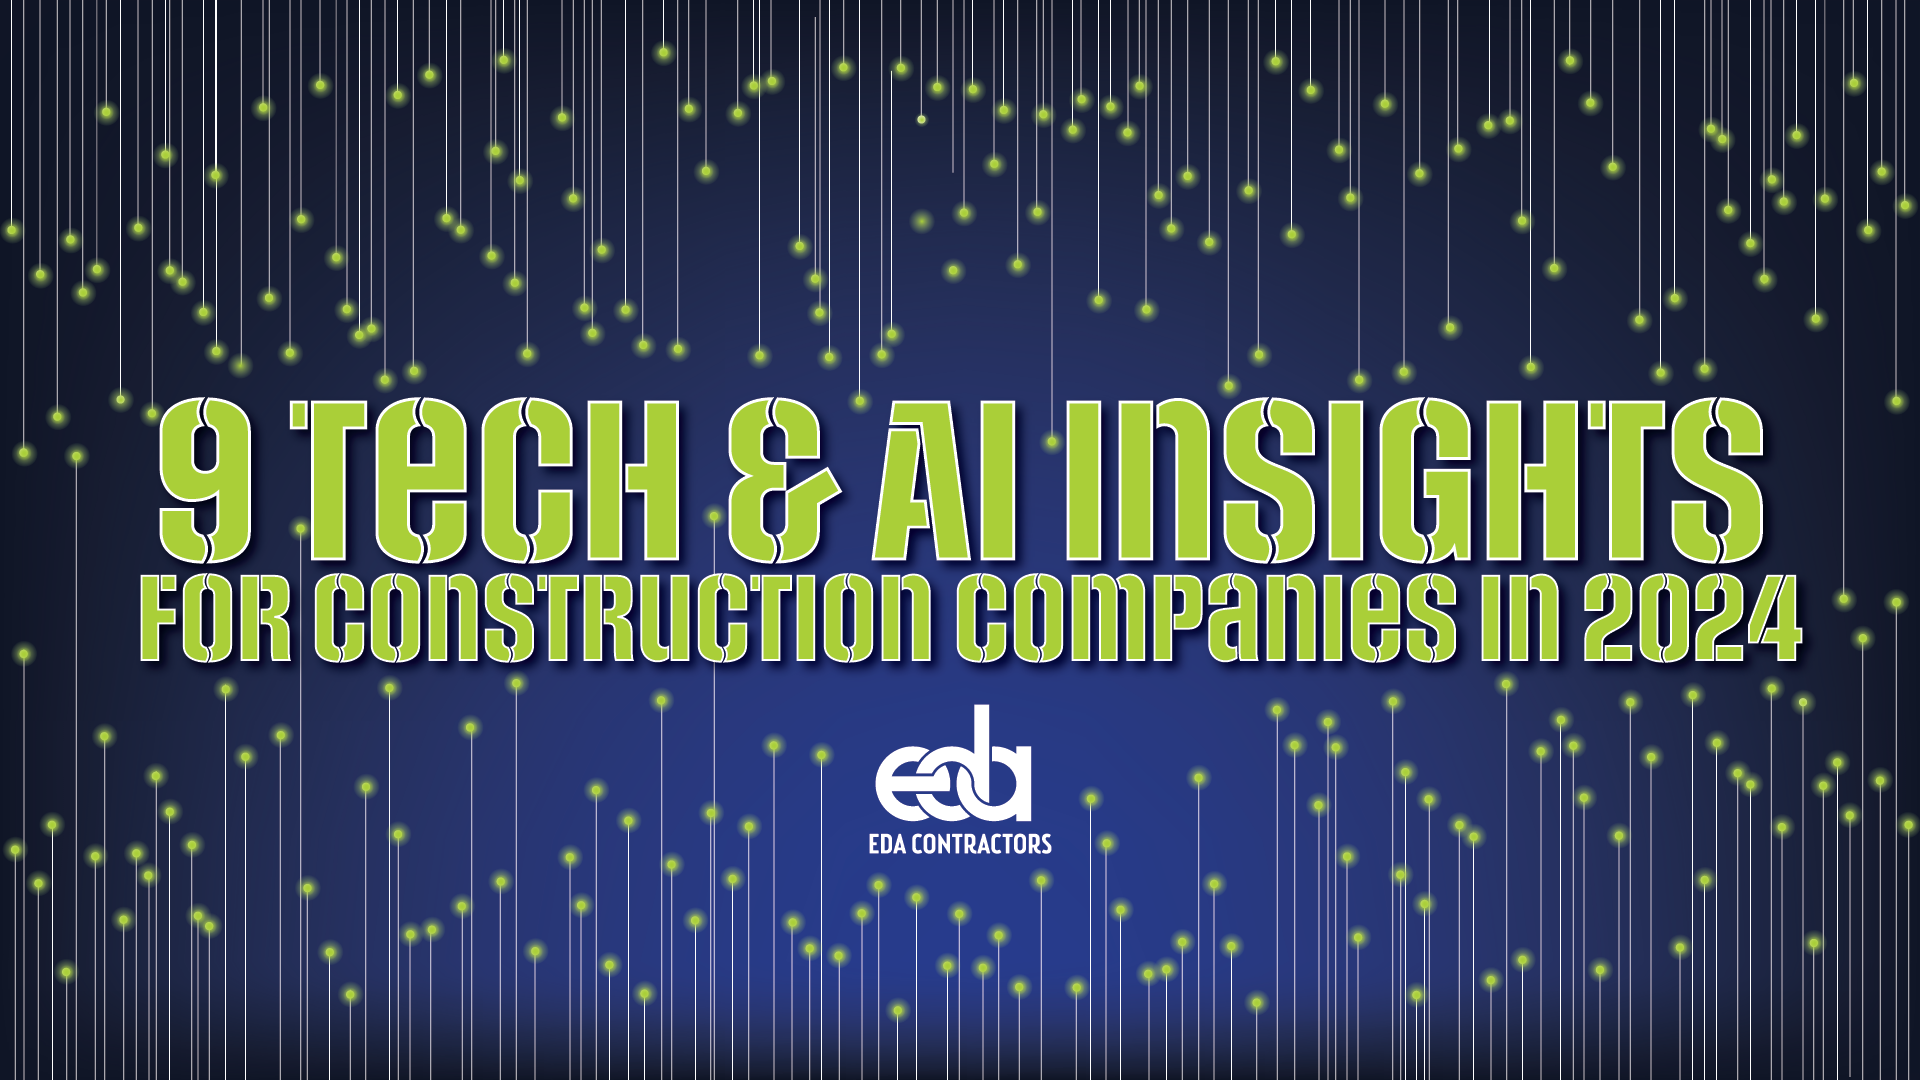 9-tech-and-ai-insights-for-construction-companies-in-2024